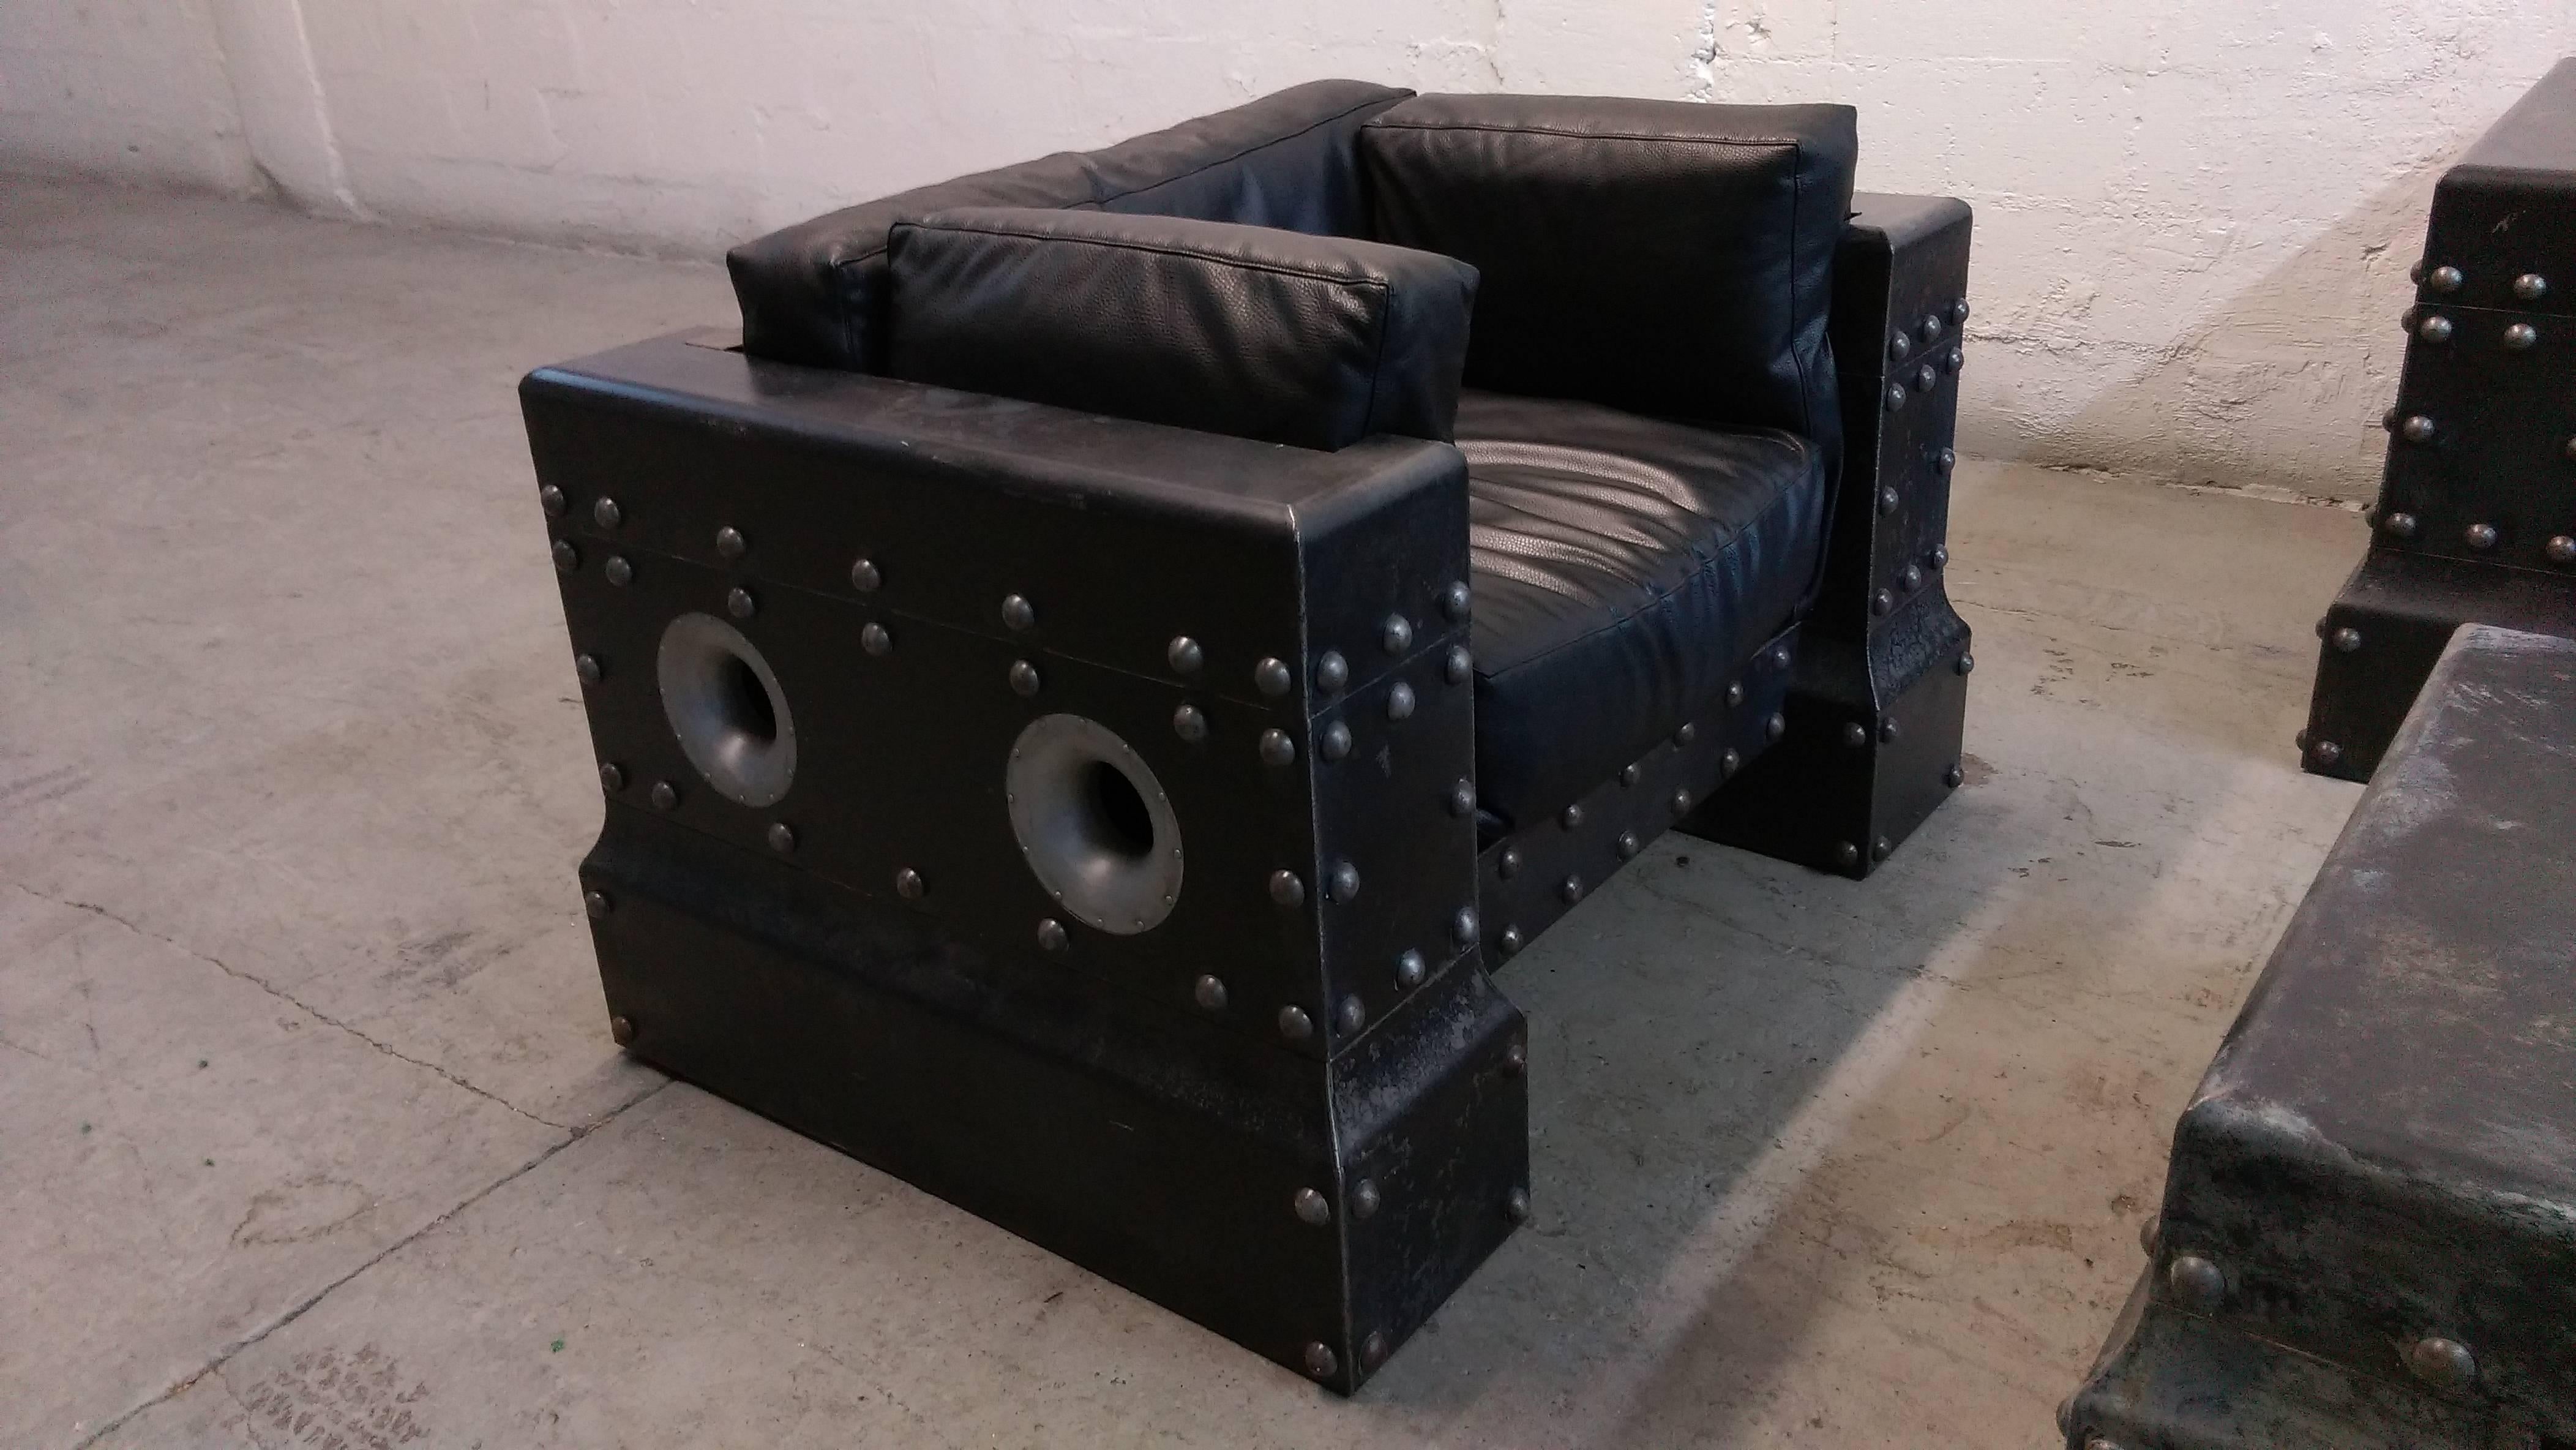 This was a custom-made Industrial sofa group for Oakley Sunglass Corporation. Its made from thick steel and the cushions are 100% genuine leather.
Measure: Sofa is 27